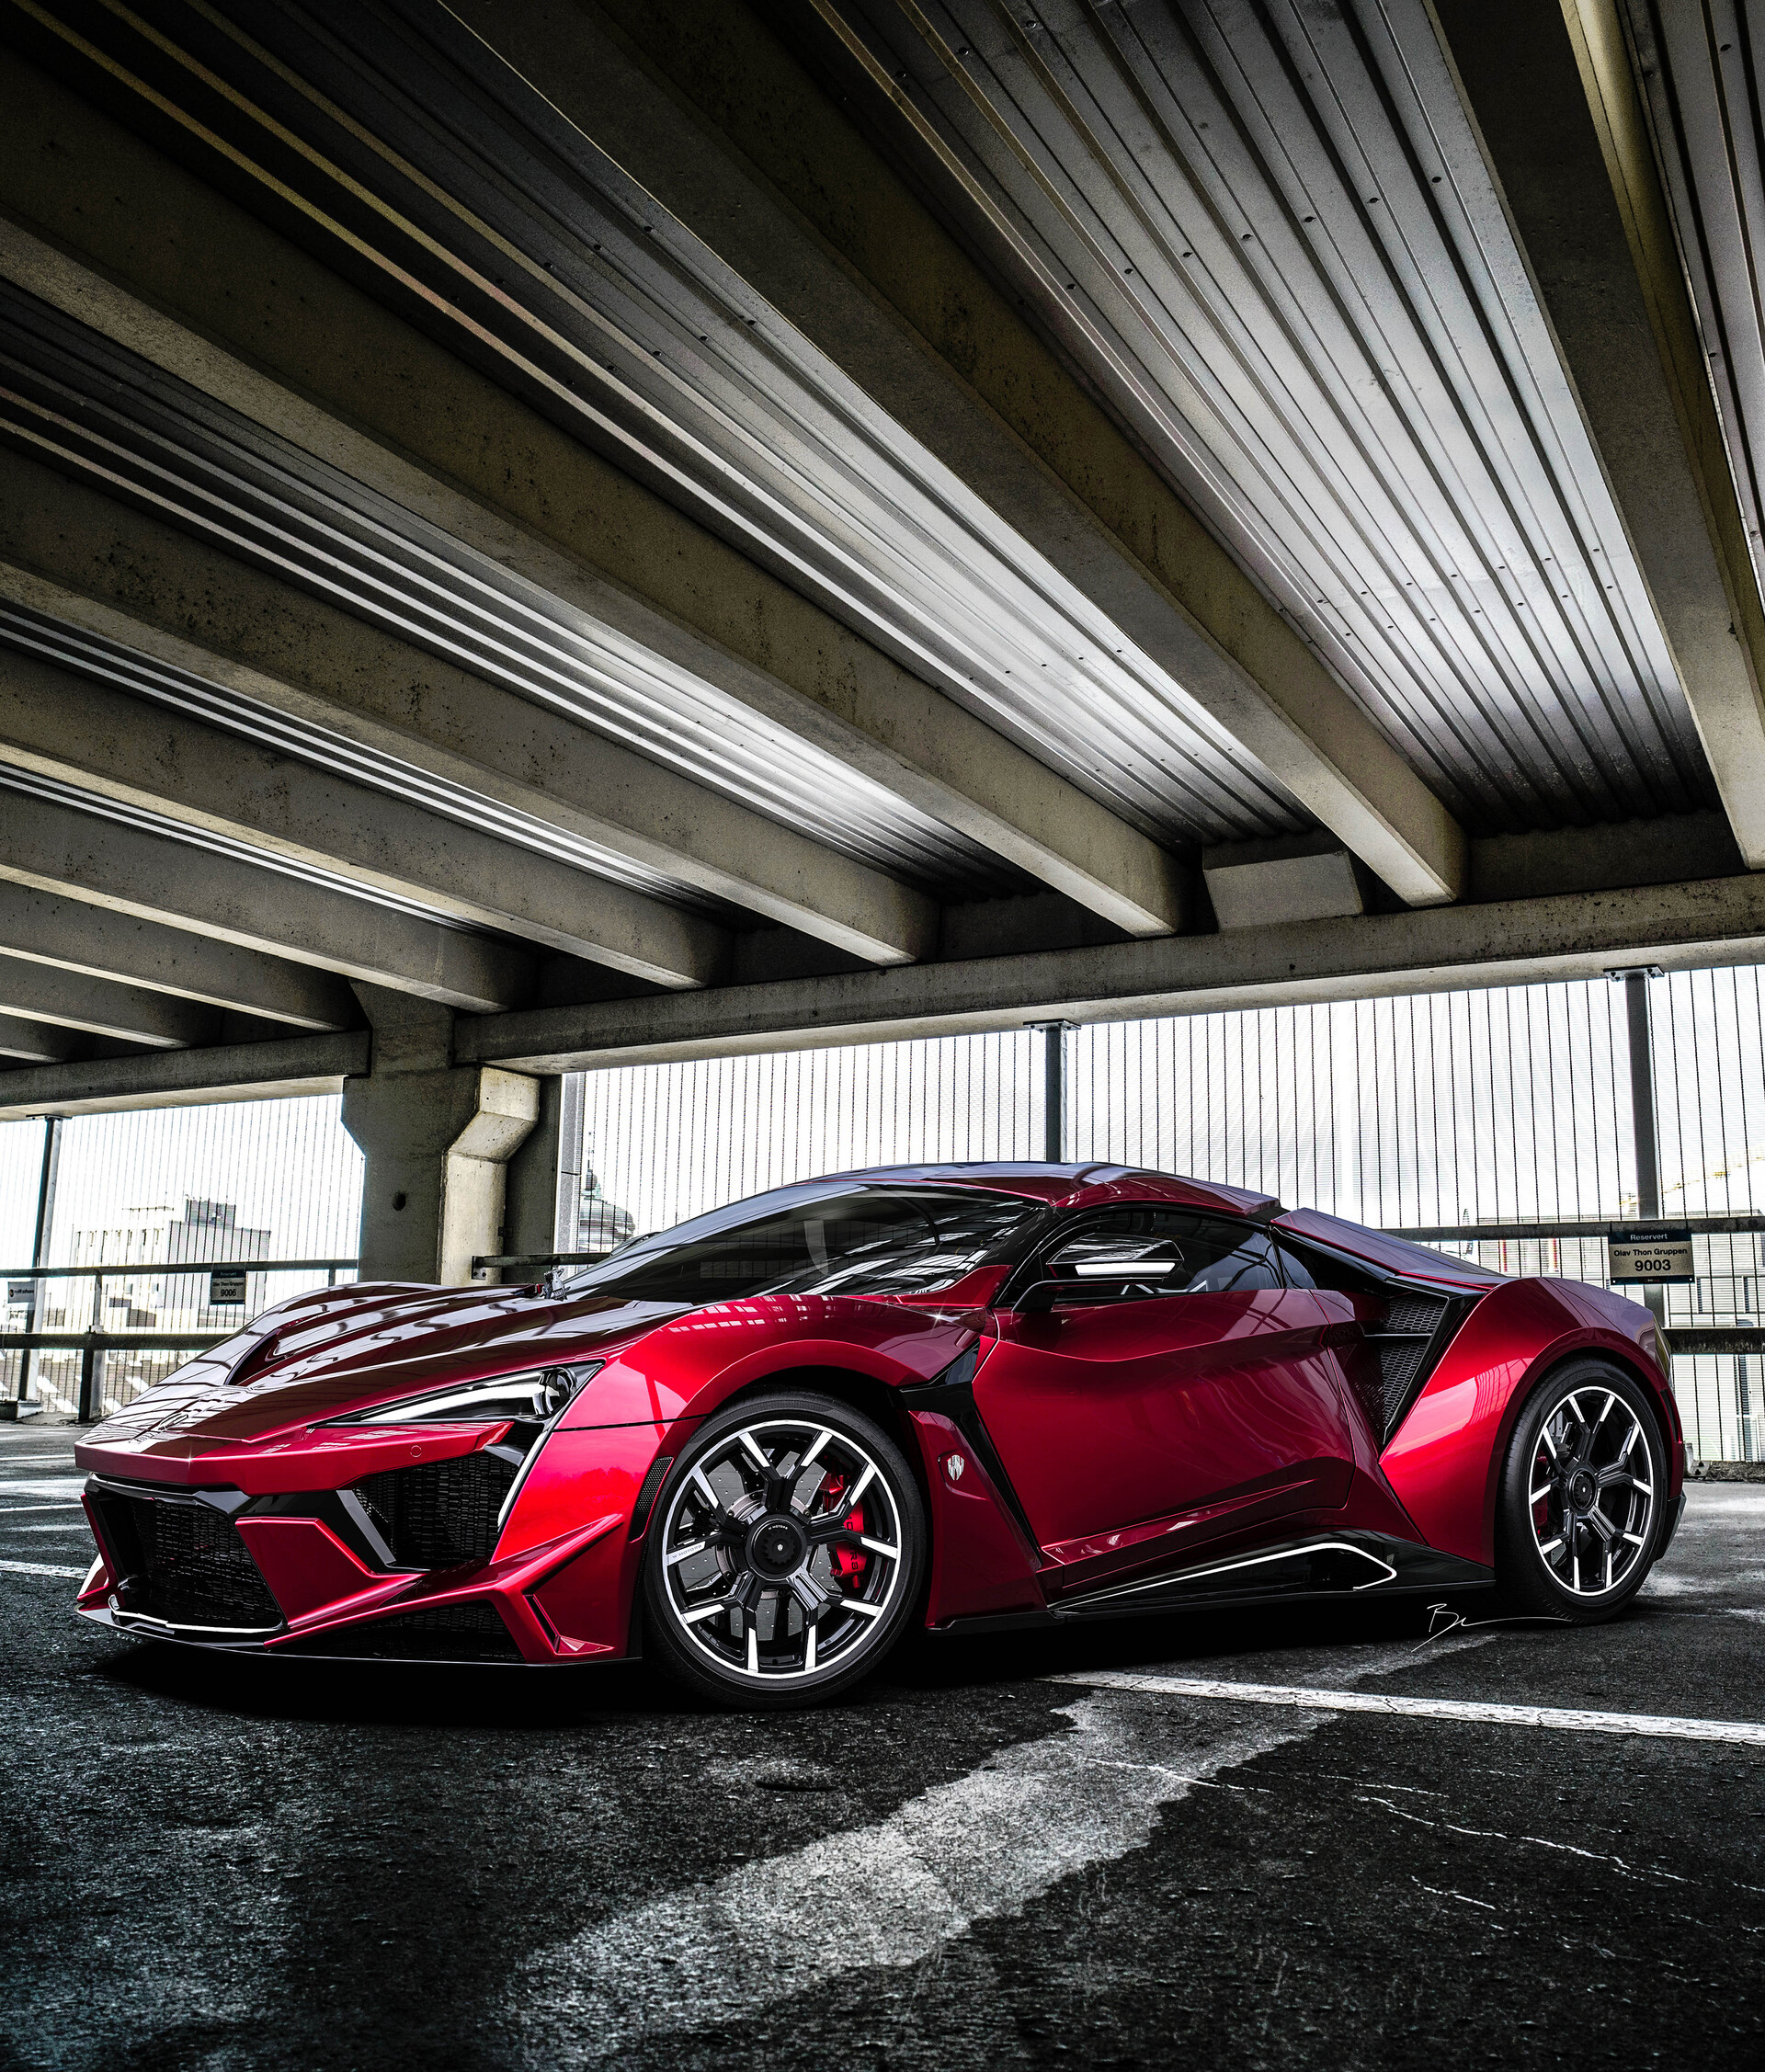 124861 download wallpaper car, sports, cars, red, machine, sports car, supercar screensavers and pictures for free